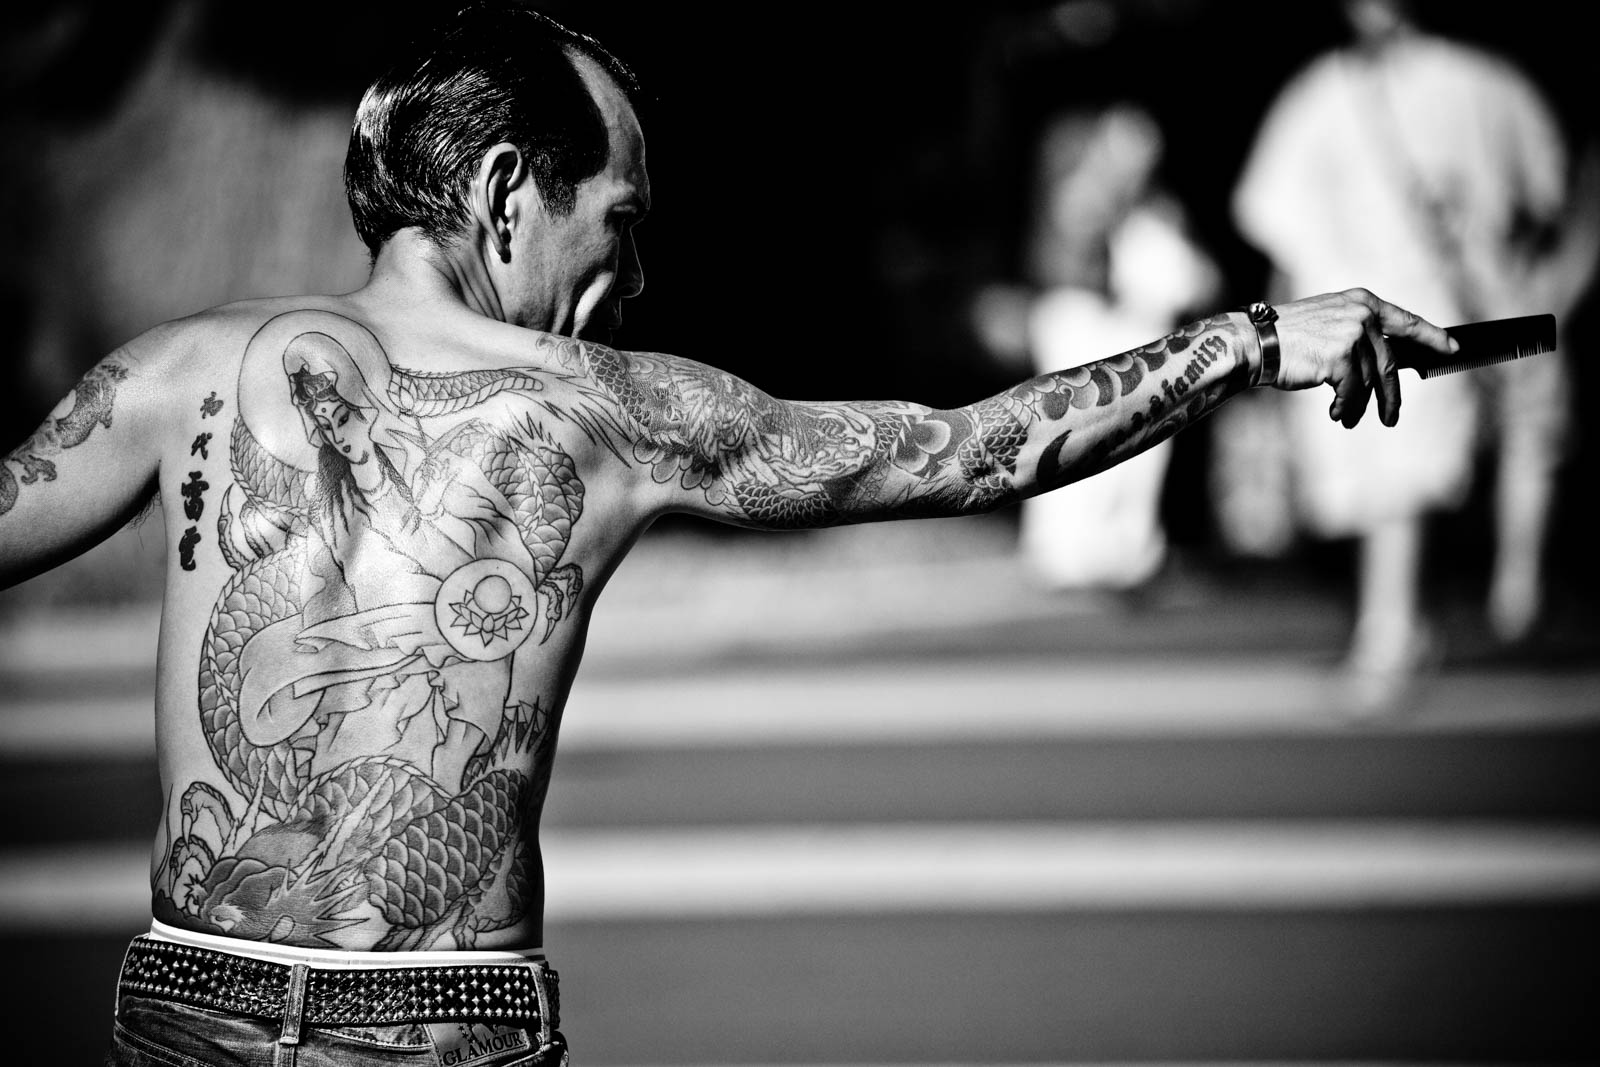 Rock-a-Billy at YoYogi Park, Tokyo, full with tattoos dancing. Street Photography by Victor Borst